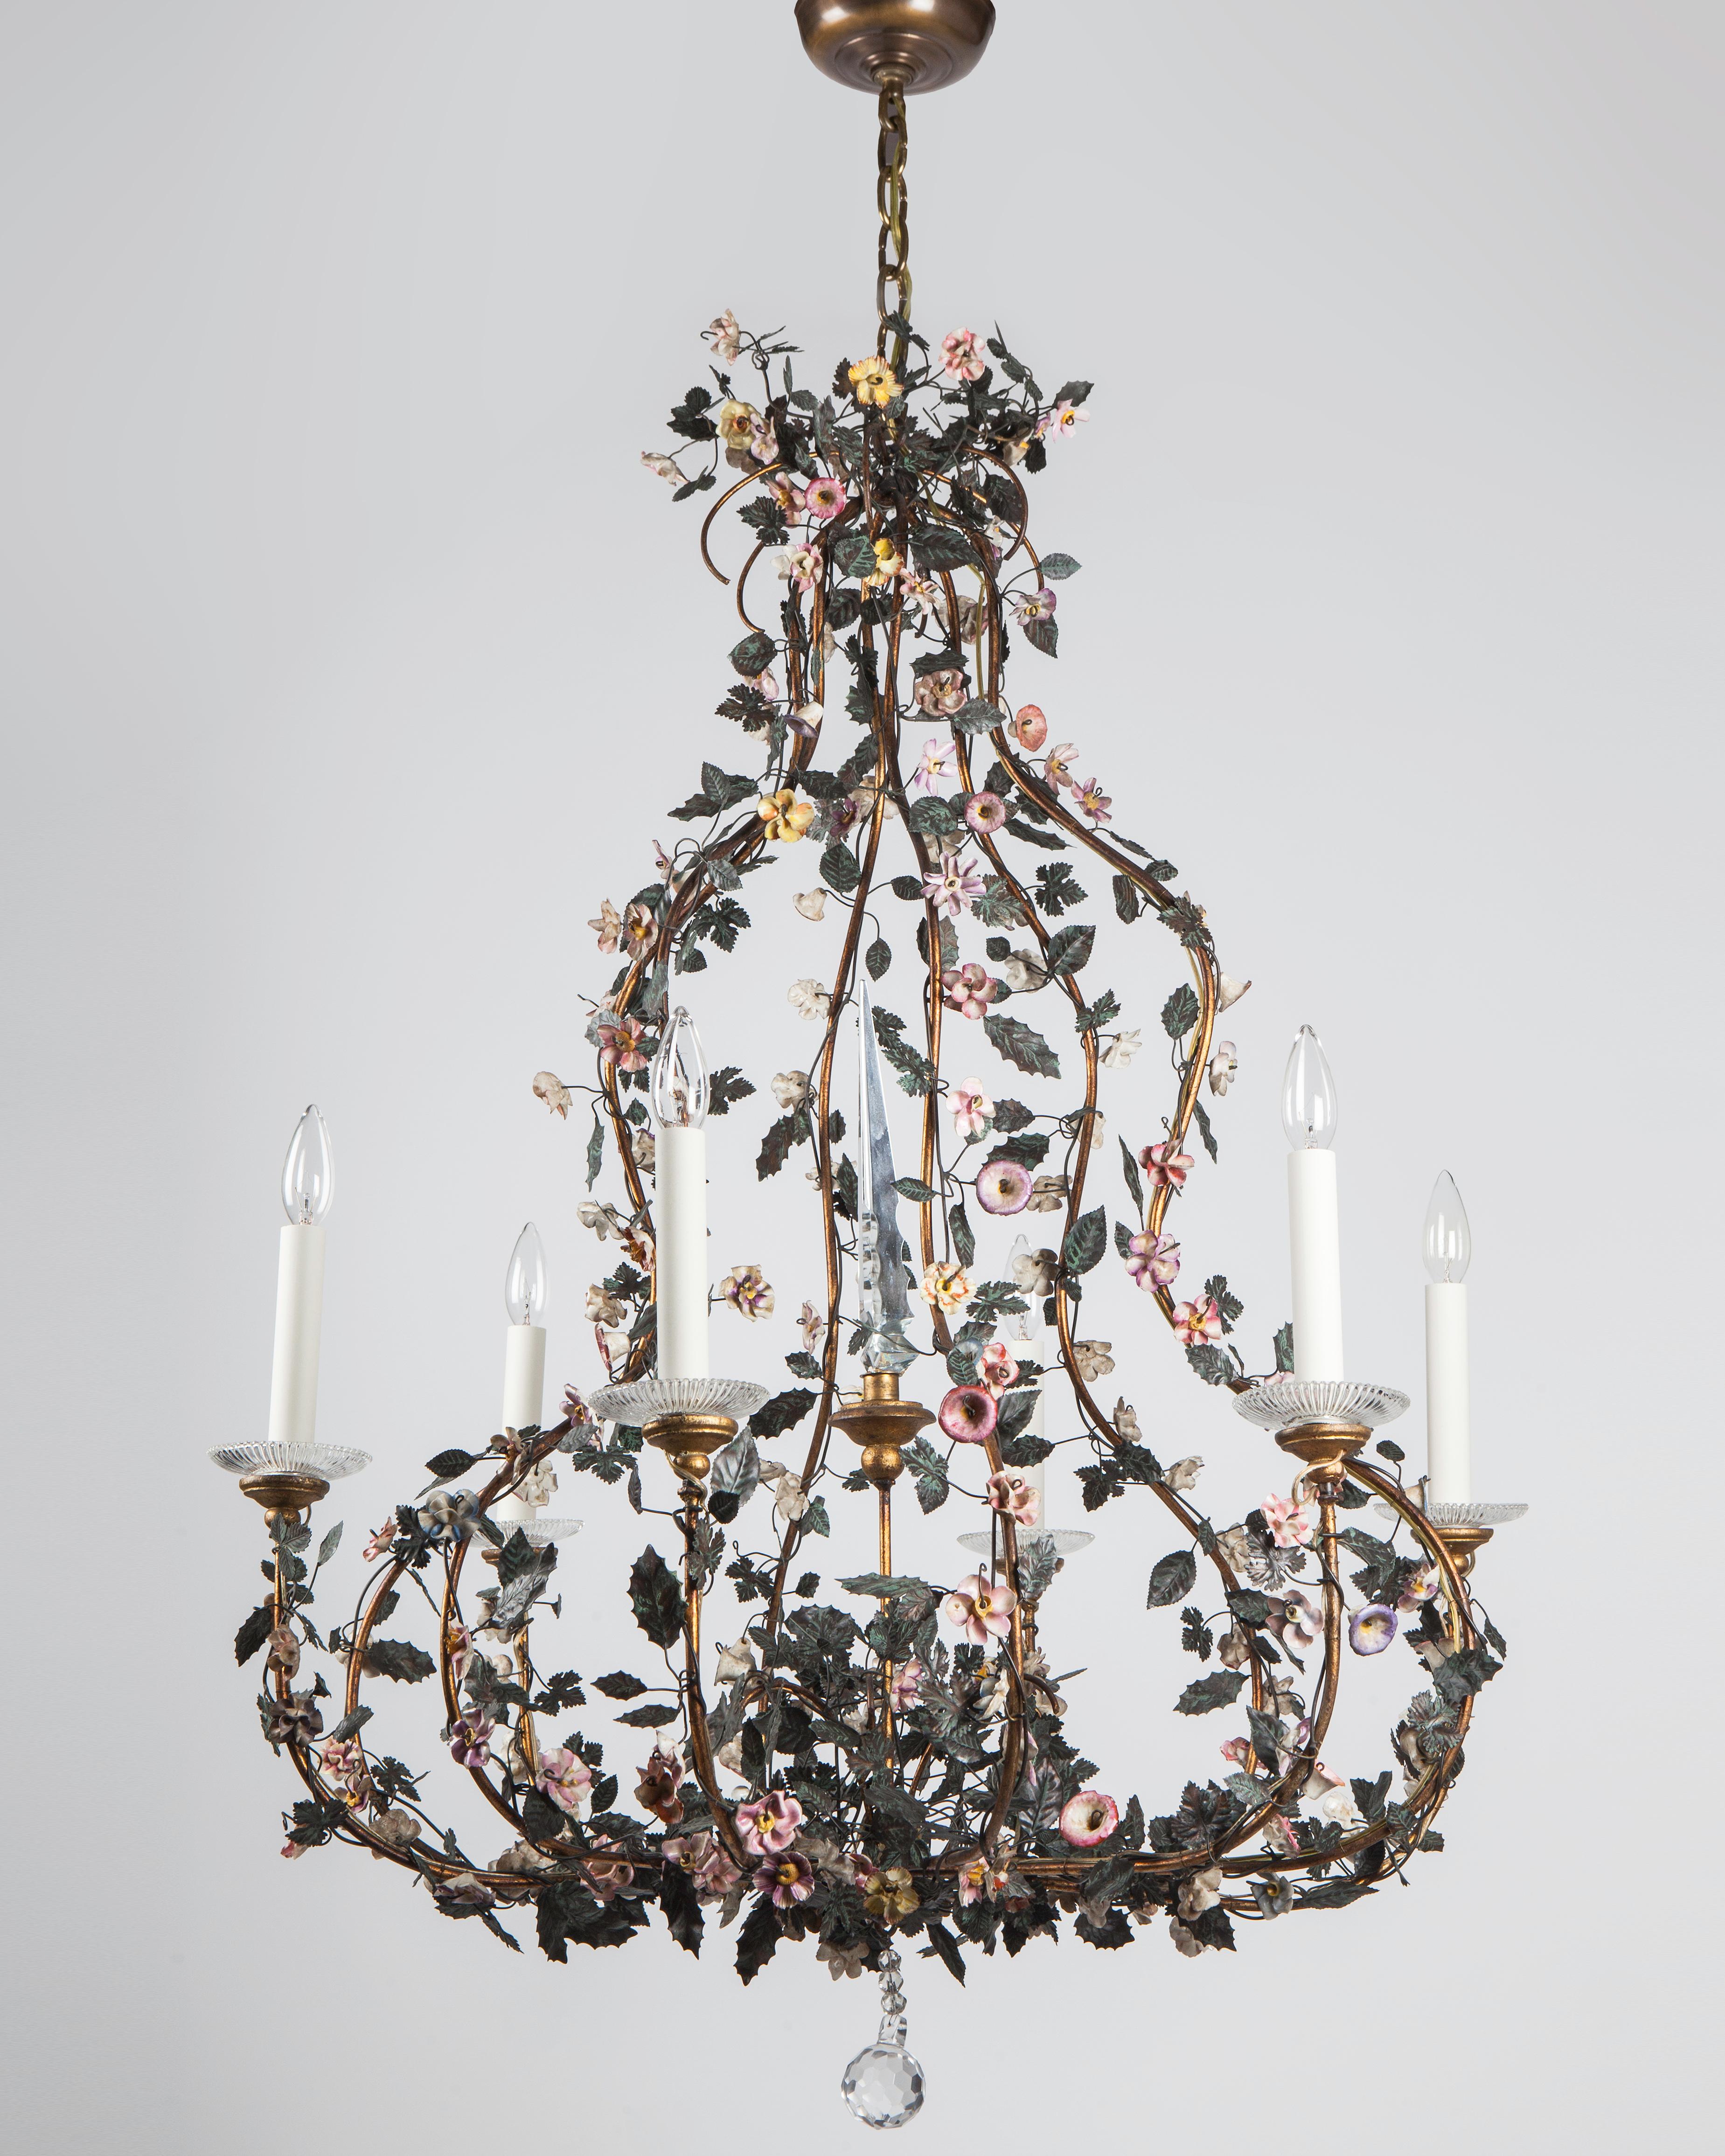 AHL4212
A large six arm vintage tole chandelier having a darkened iron openwork lyre form frame detailed with hand-painted vines, sprays of leaves, and colorful porcelain flowers. Sparkling crystal details catch the light throughout including